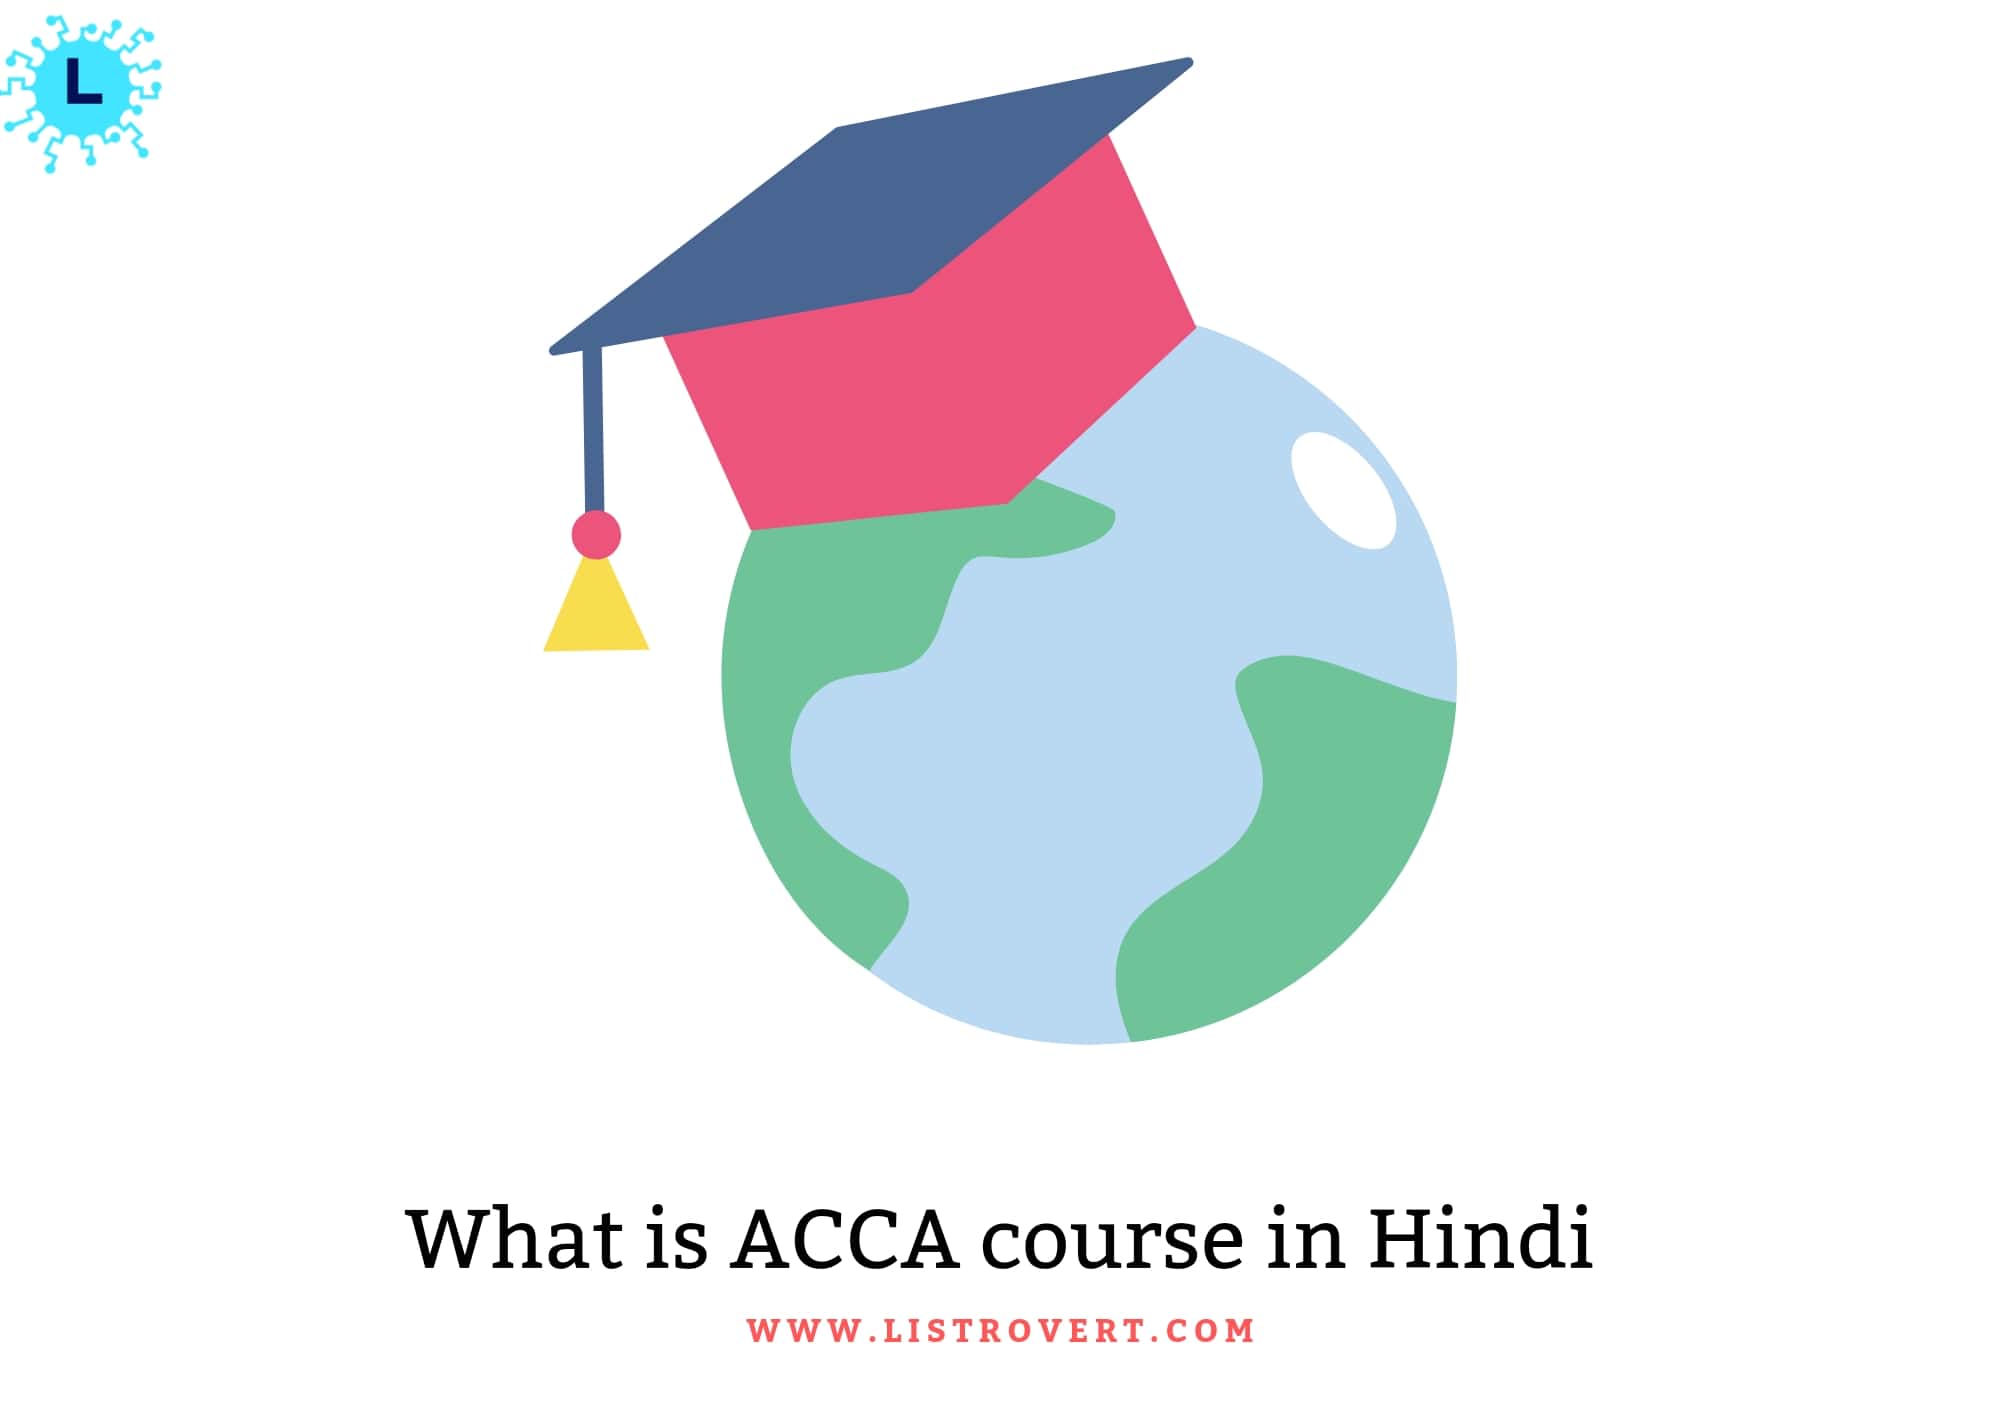 What is ACCA course in Hindi